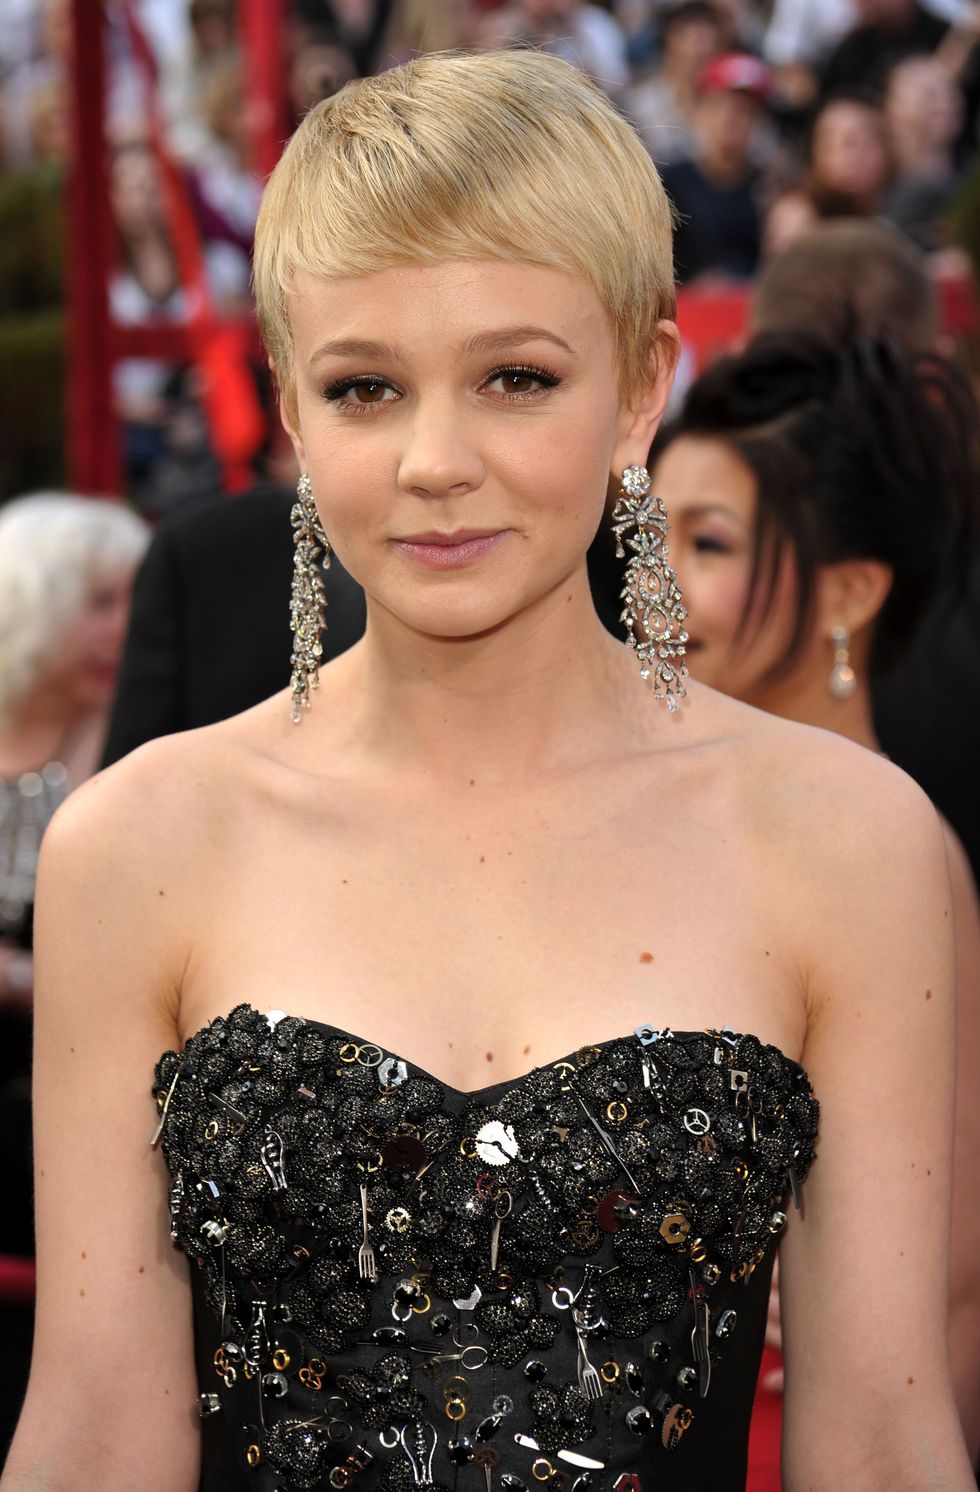 HOLLYWOOD - MARCH 07:  Actress Carey Mulligan arrives at the 82nd Annual Academy Awards held at Kodak Theatre on March 7, 2010 in Hollywood, California.  (Photo by John Shearer/Getty Images)